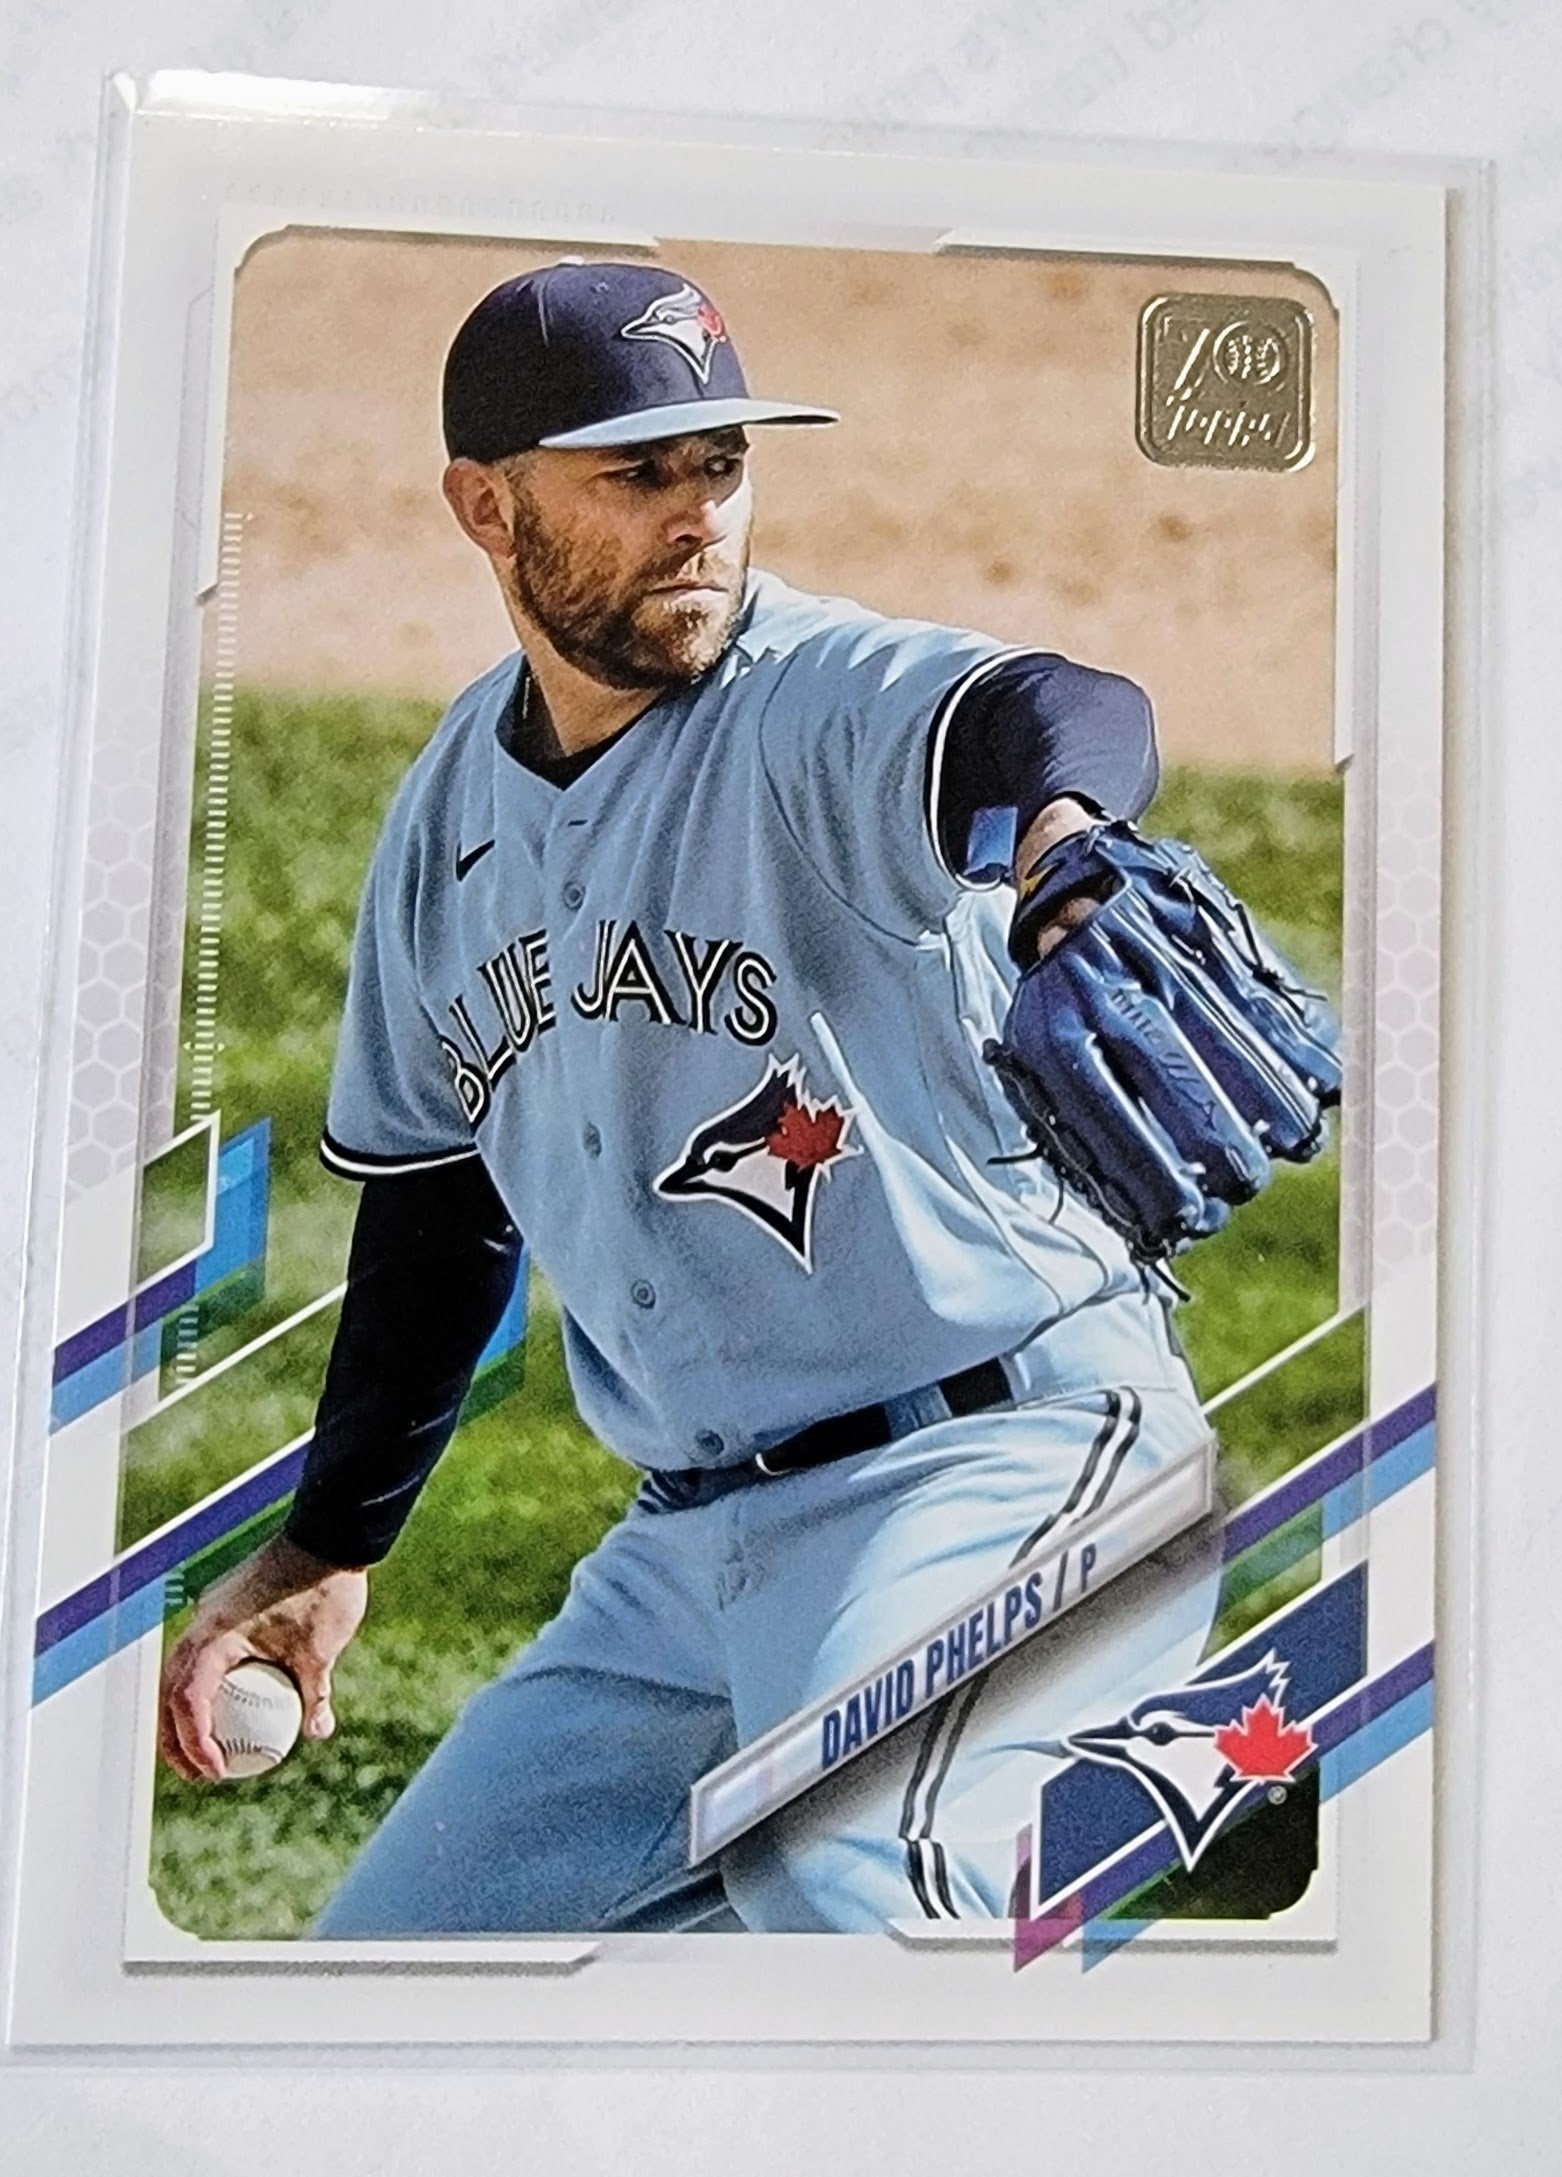 2021 Topps Update David Phelps Baseball Trading Card SMCB1 simple Xclusive Collectibles   